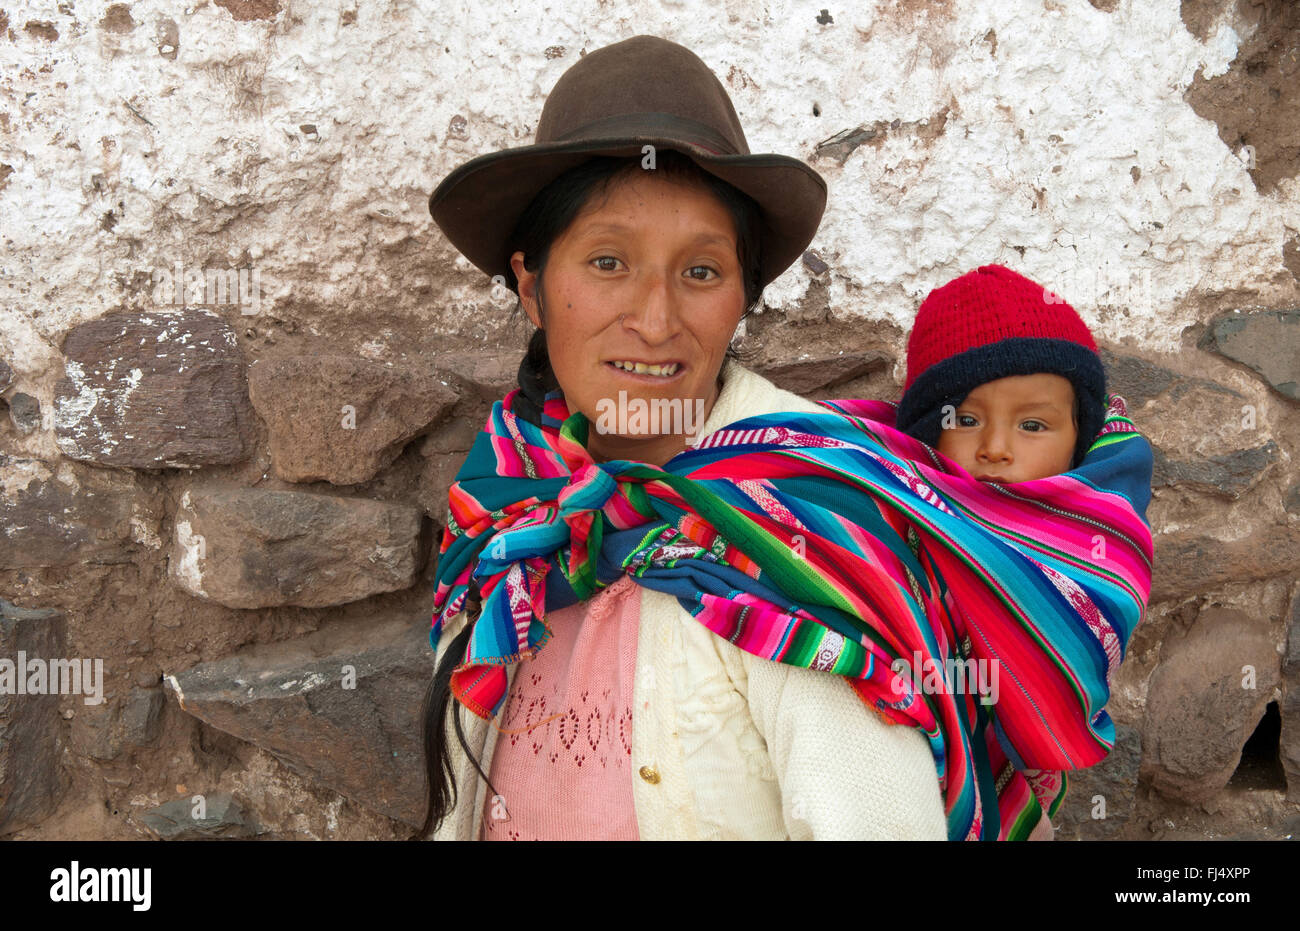 woman in traditional clothing carrying piggyback her baby in a sling, portrait, Peru, Pisaq Stock Photo